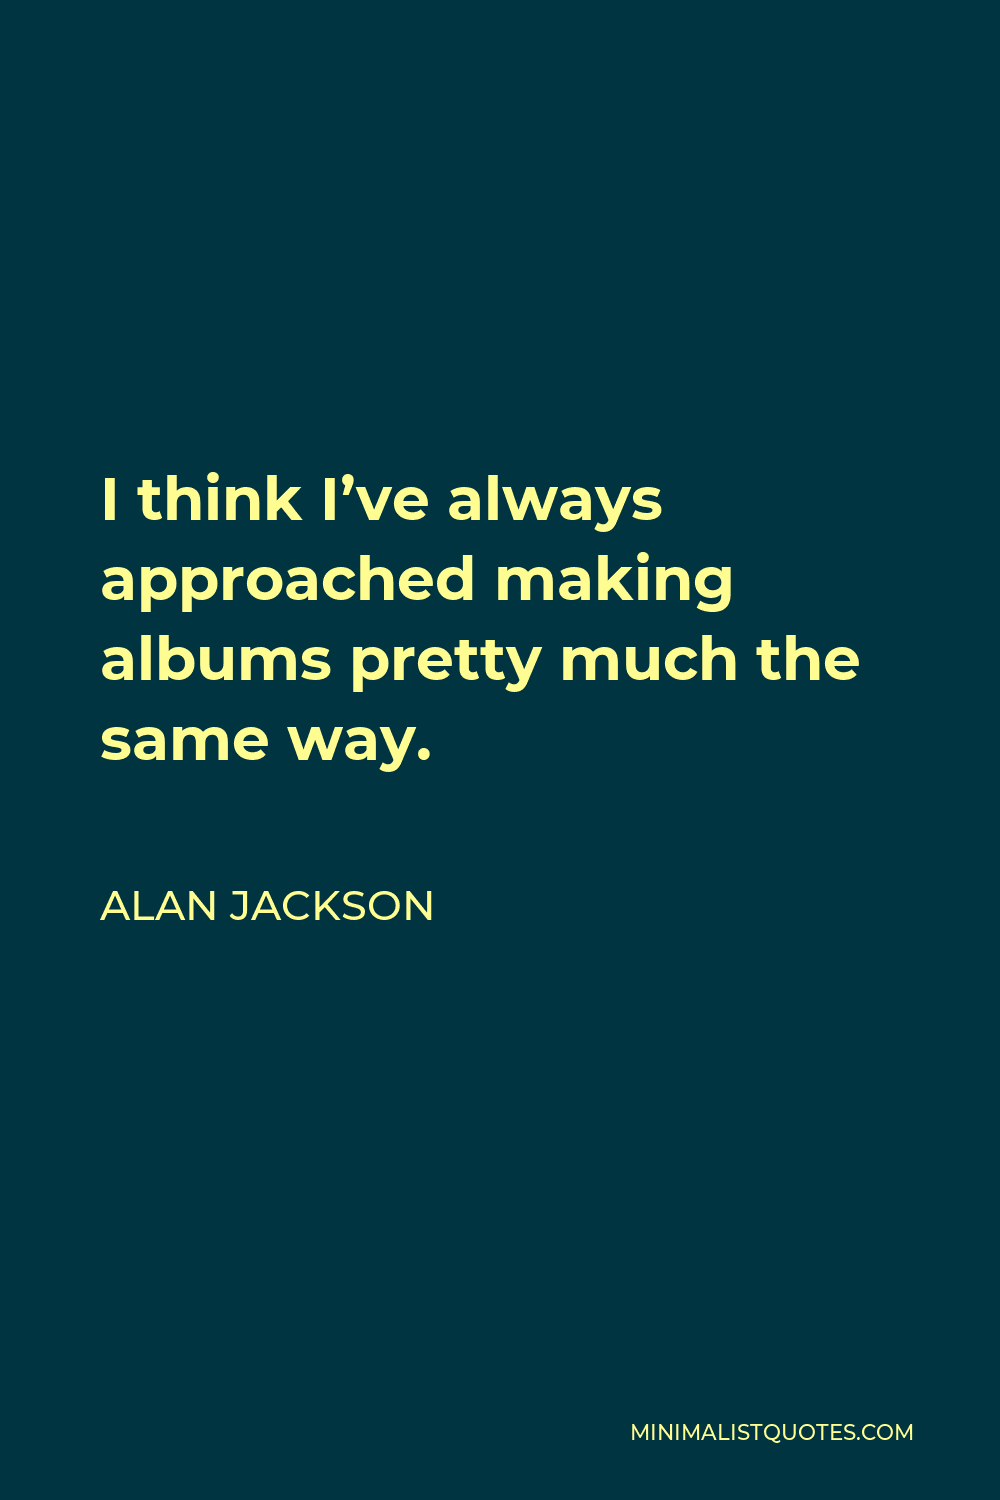 Alan Jackson Quote - I think I’ve always approached making albums pretty much the same way.